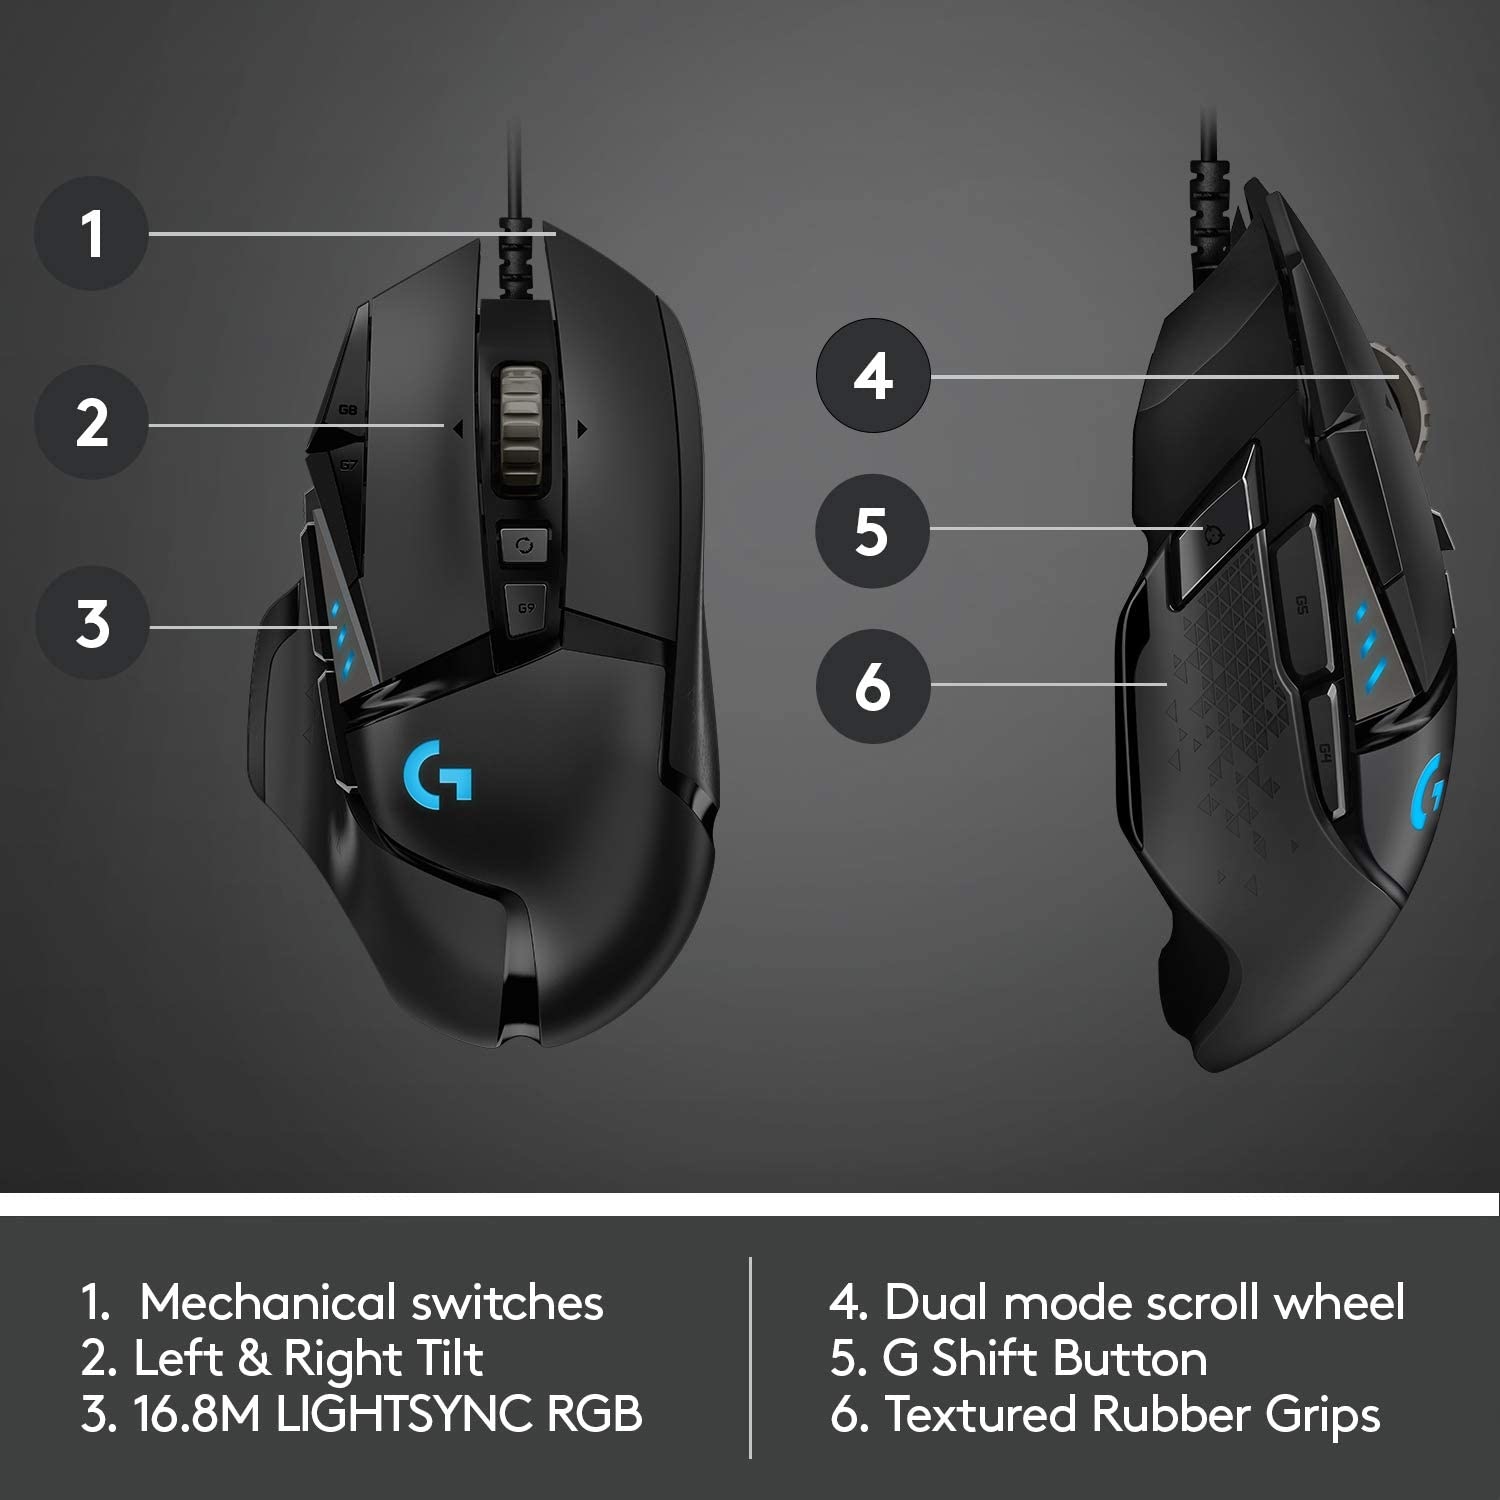 Logitech G502 Proteus RGB Tunable Gaming Mouse, 12,000 DPI On-The-Fly DPI Shifting, Personalized Weight and Balance Tuning with (5) 3.6g Weights, 11 Programmable Buttons - NWCA Inc.